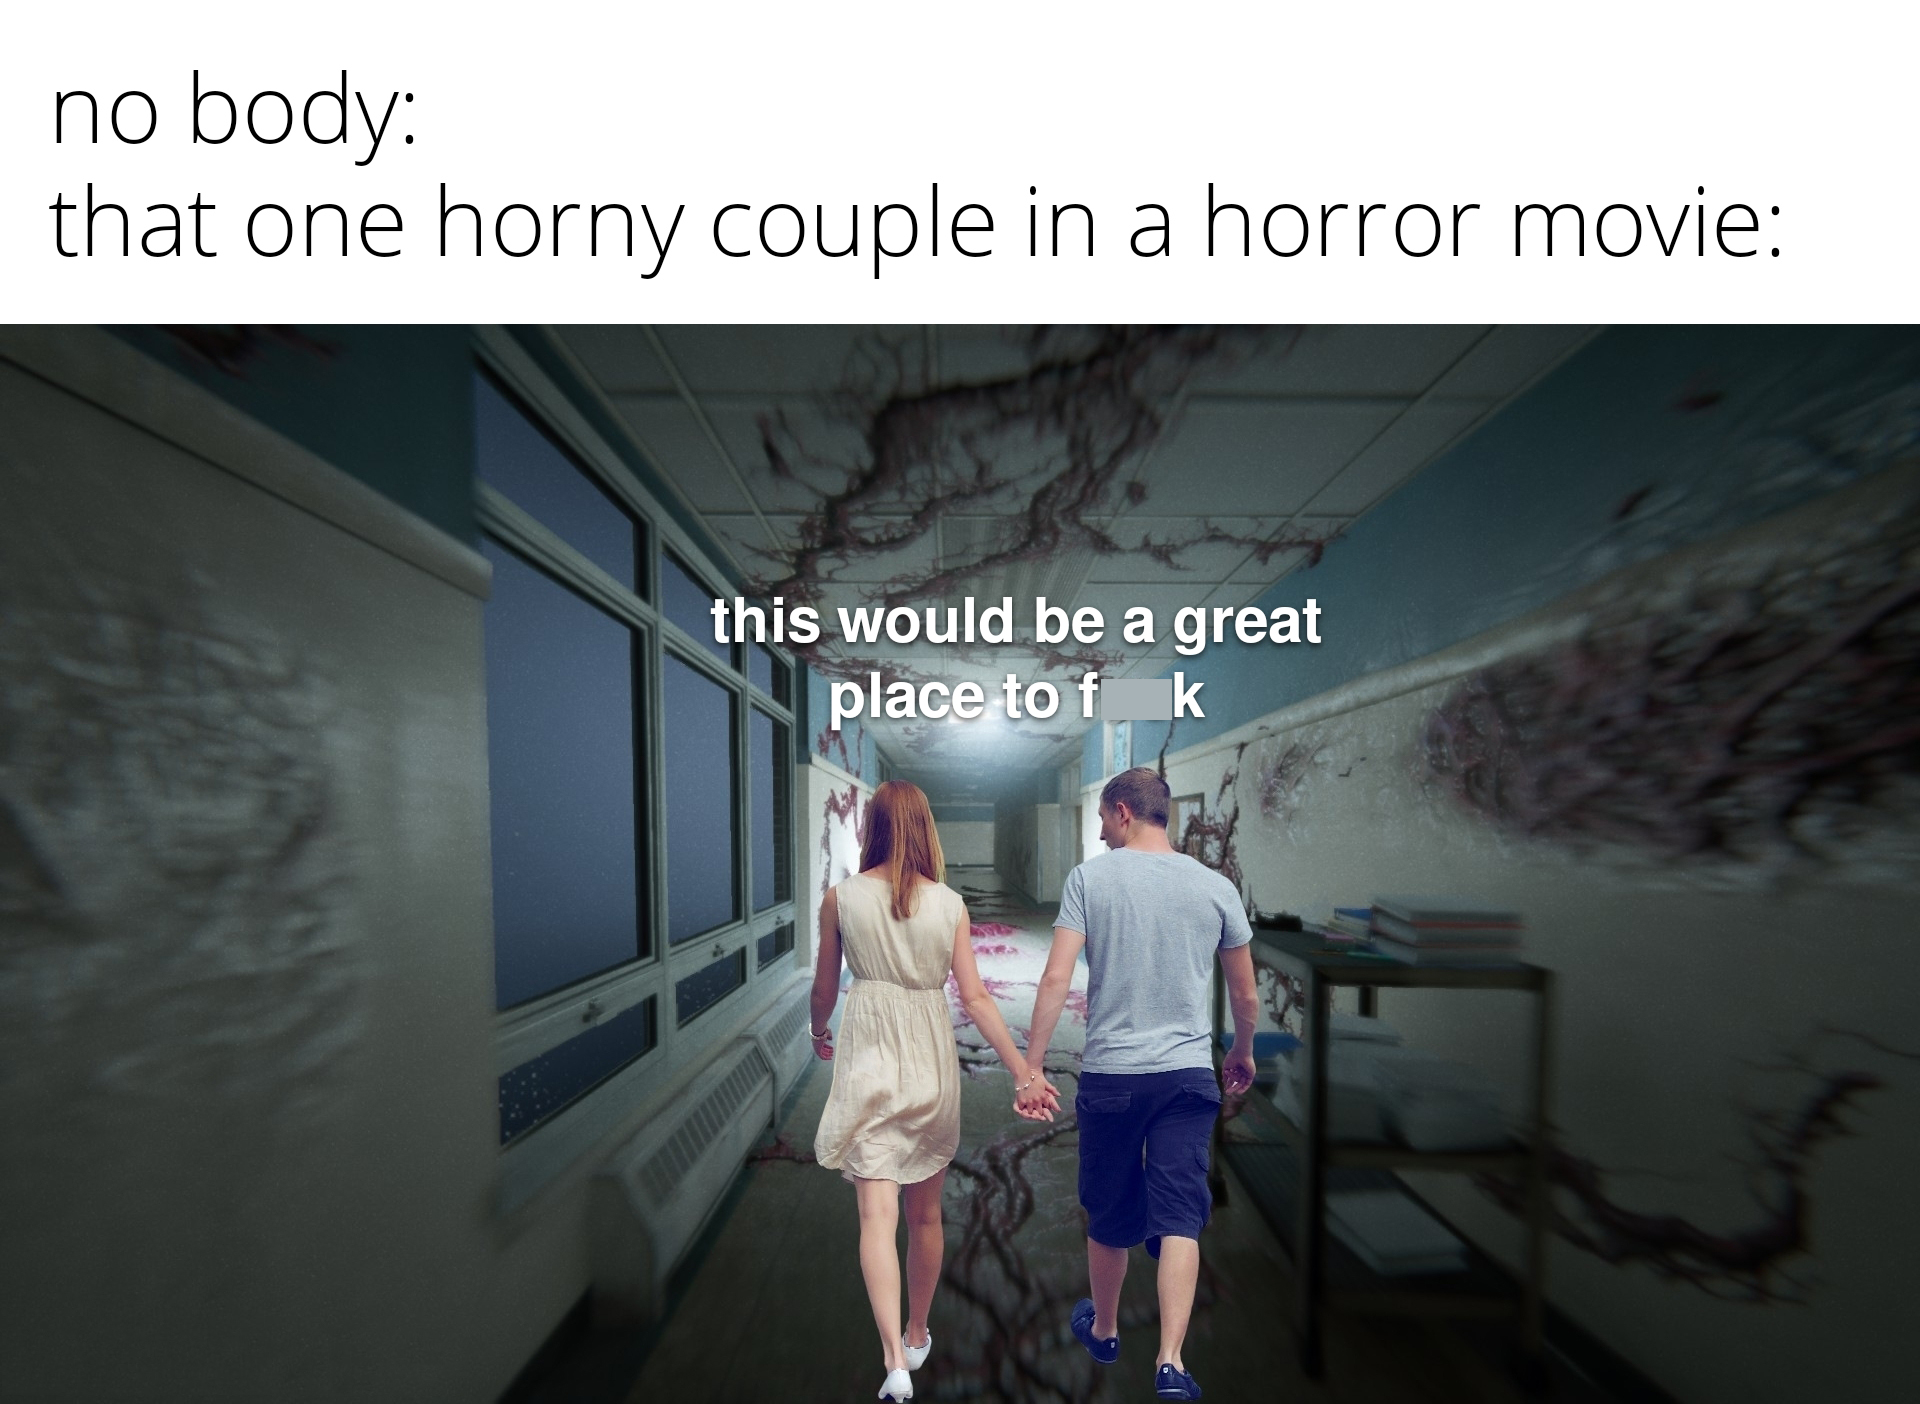 funny memes - presentation - no body that one horny couple in a horror movie this would be a great place to fk